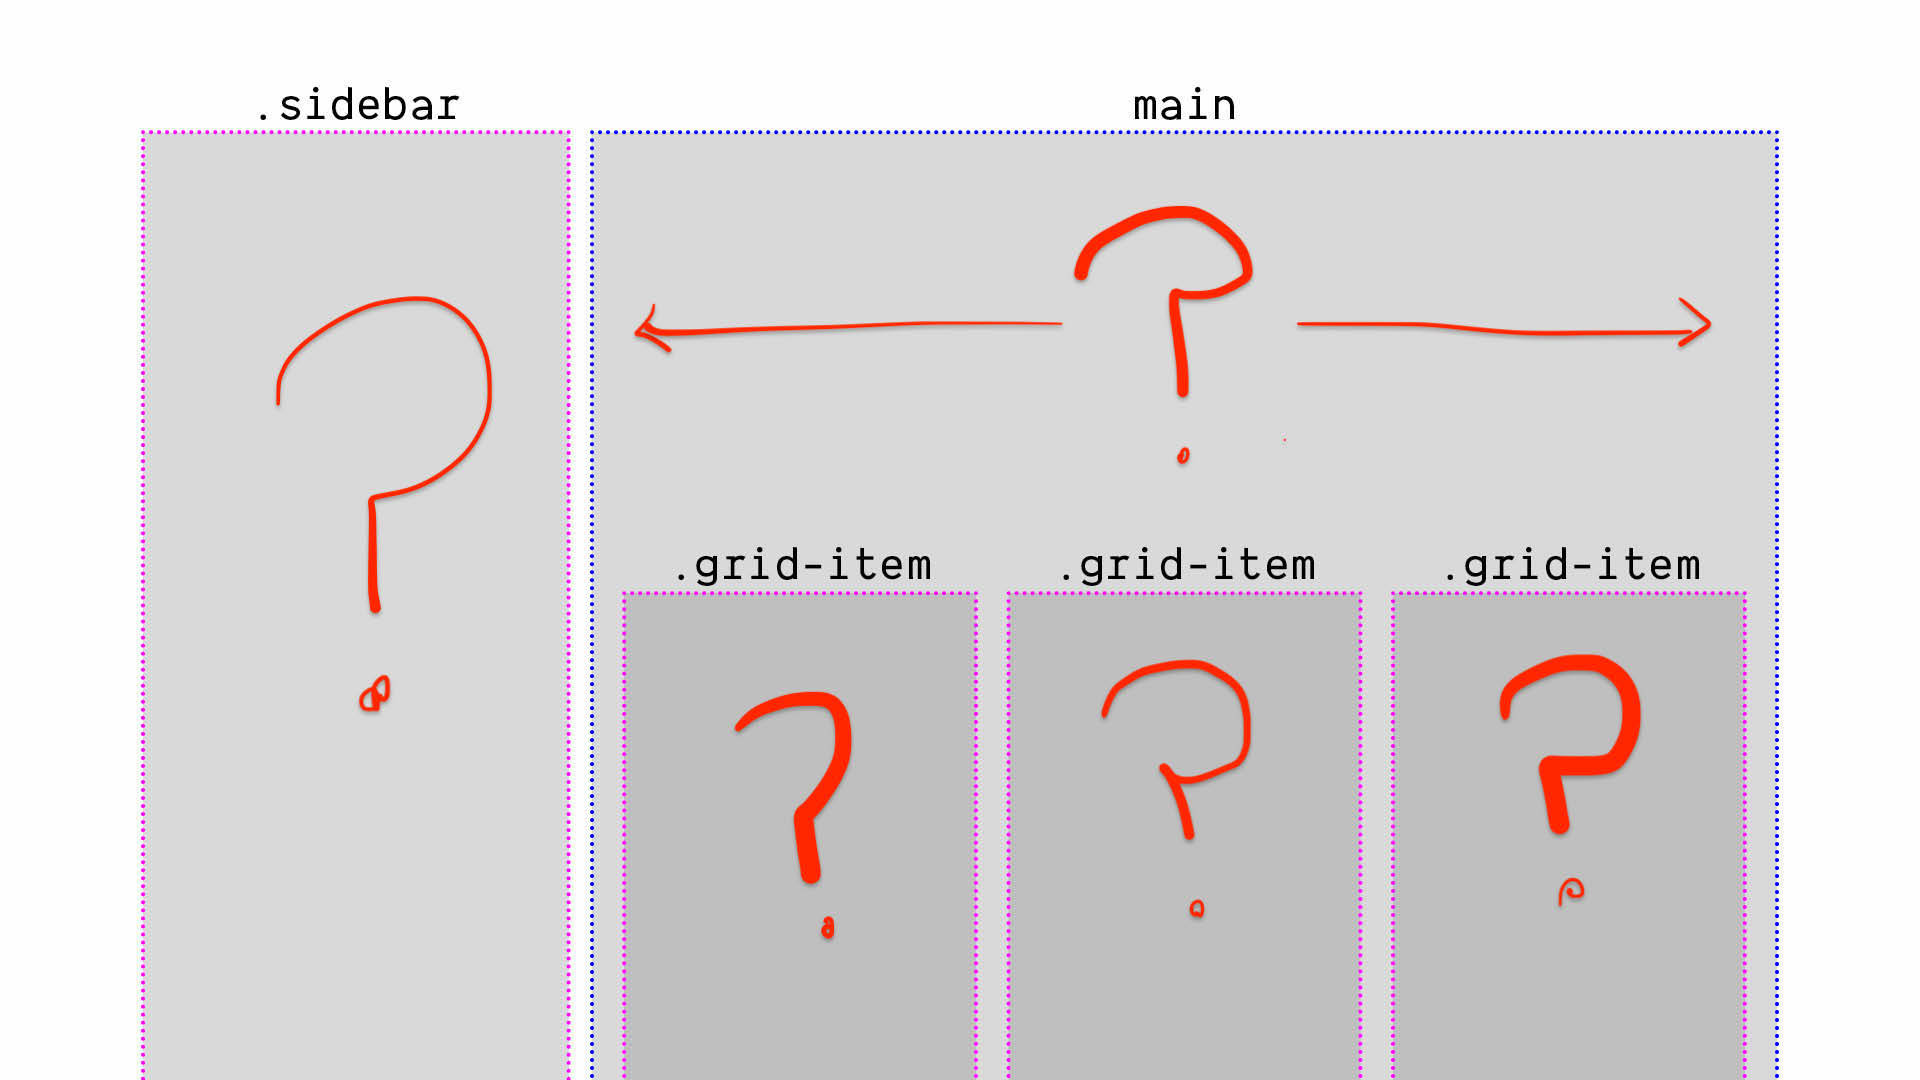 An outline of nested containers,
each with a big red question mark.
Sidebar next to larger main area,
which has smaller nested grid-items.
